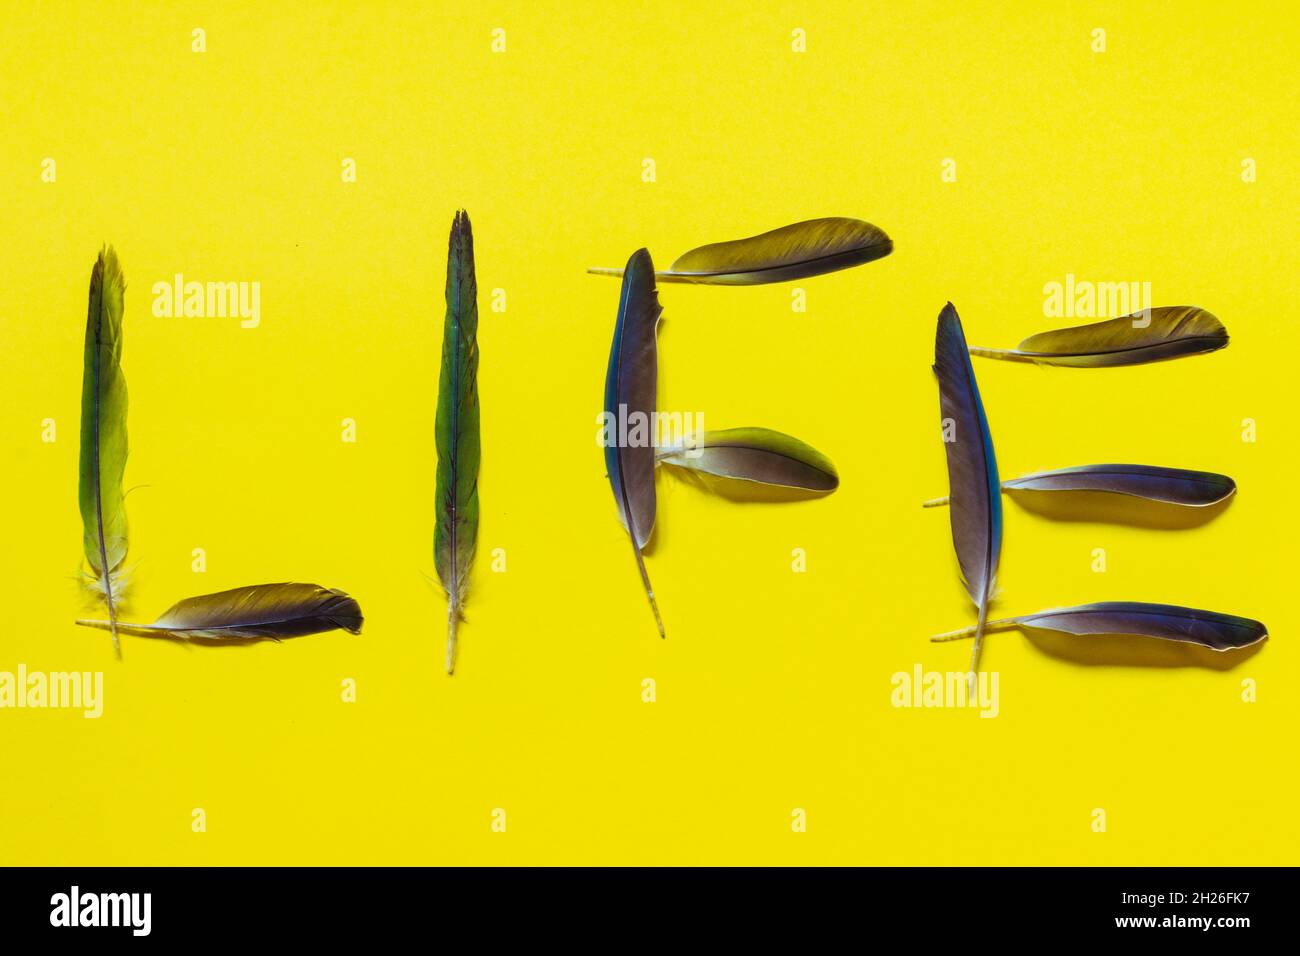 The word life made of bird feathers lie on a bright yellow background.  Stock Photo